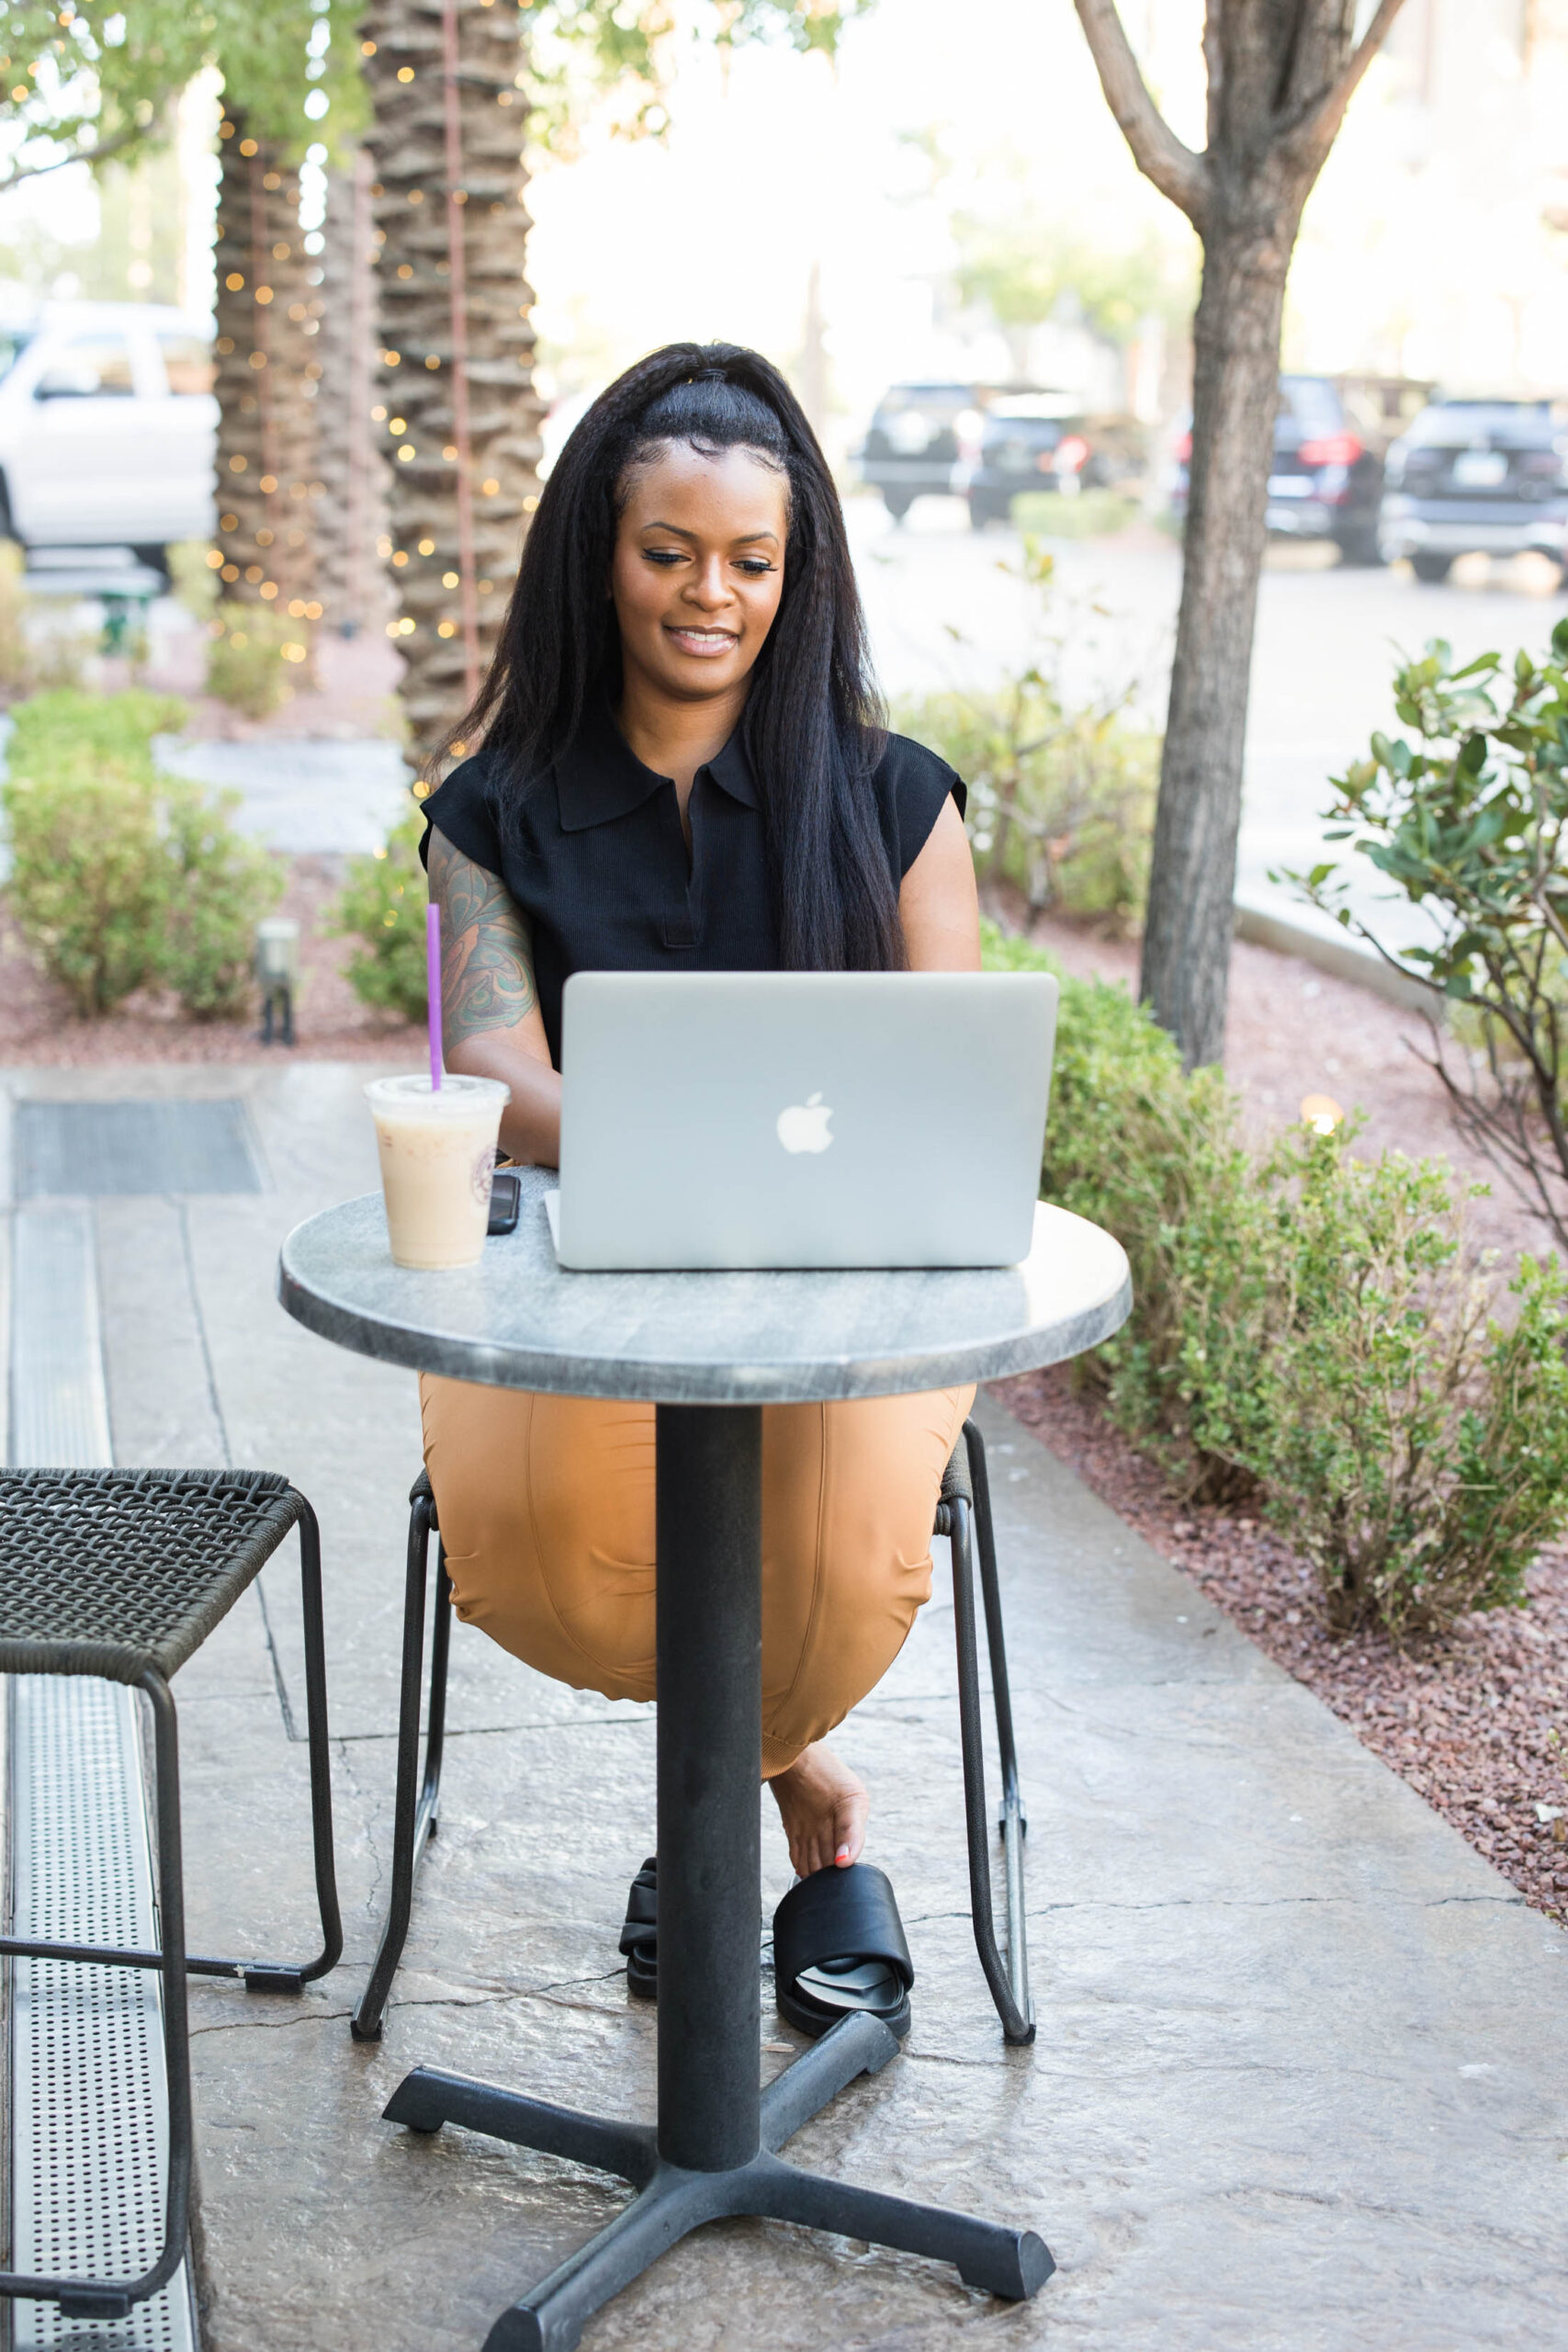 Black woman determining how to get back on track financially